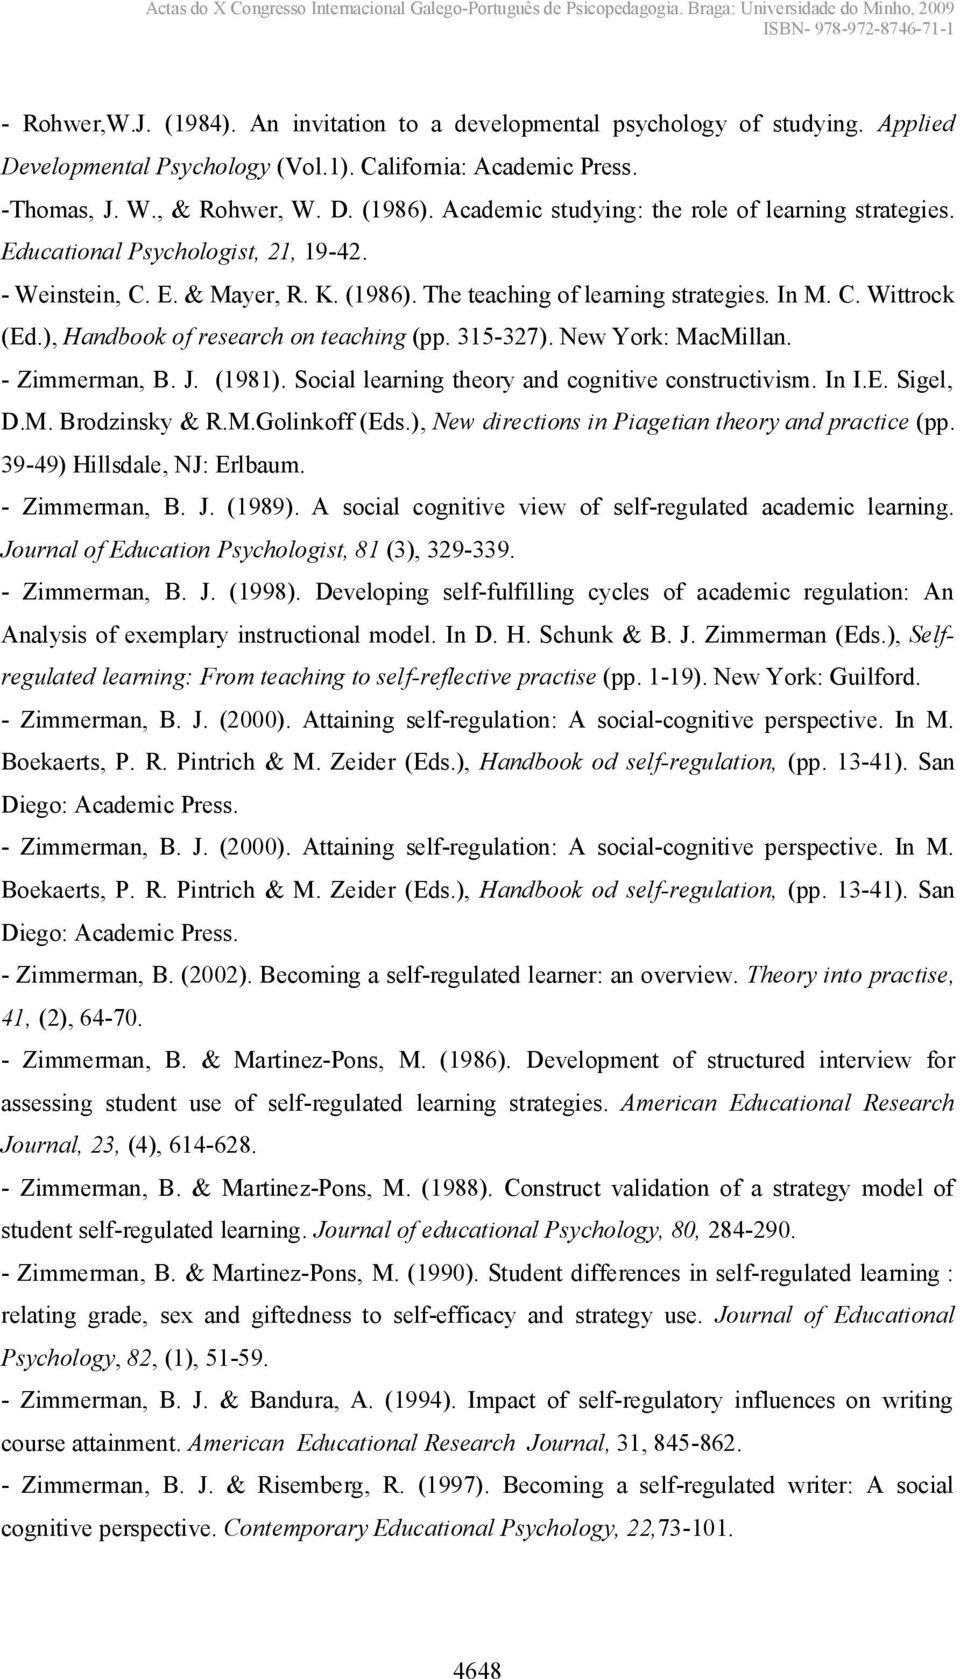 ), Handbook of research on teaching (pp. 315-327). New York: MacMillan. - Zimmerman, B. J. (1981). Social learning theory and cognitive constructivism. In I.E. Sigel, D.M. Brodzinsky & R.M.Golinkoff (Eds.